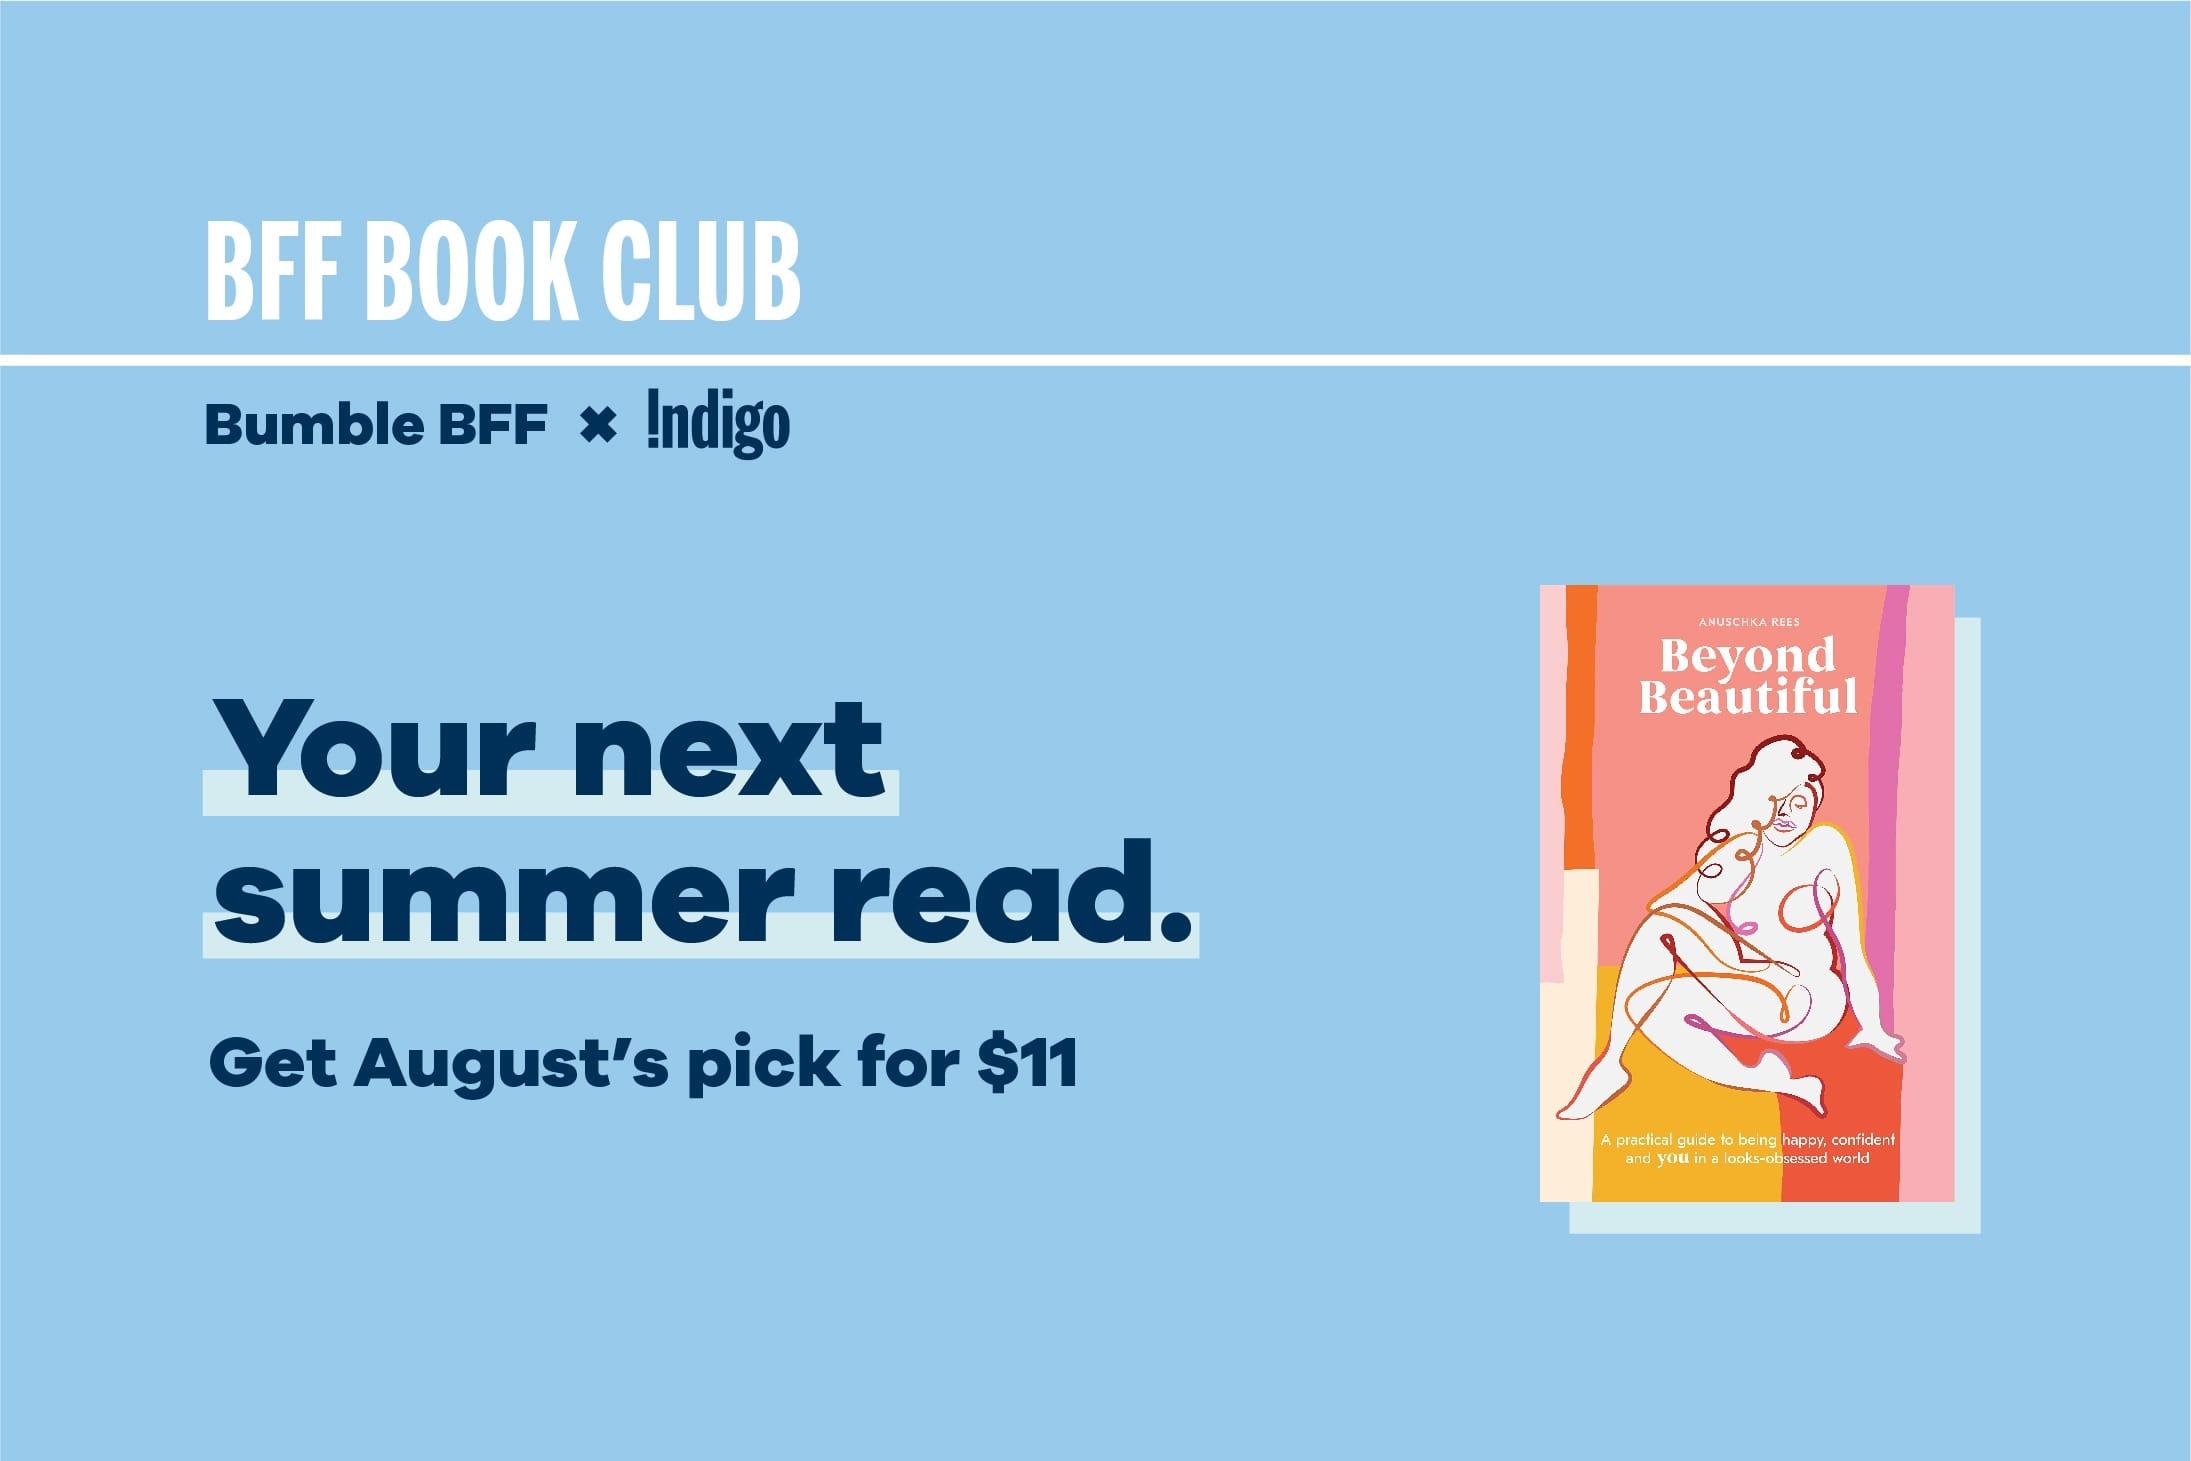 BFF Book Club, August Edition: Going “Beyond Beautiful”